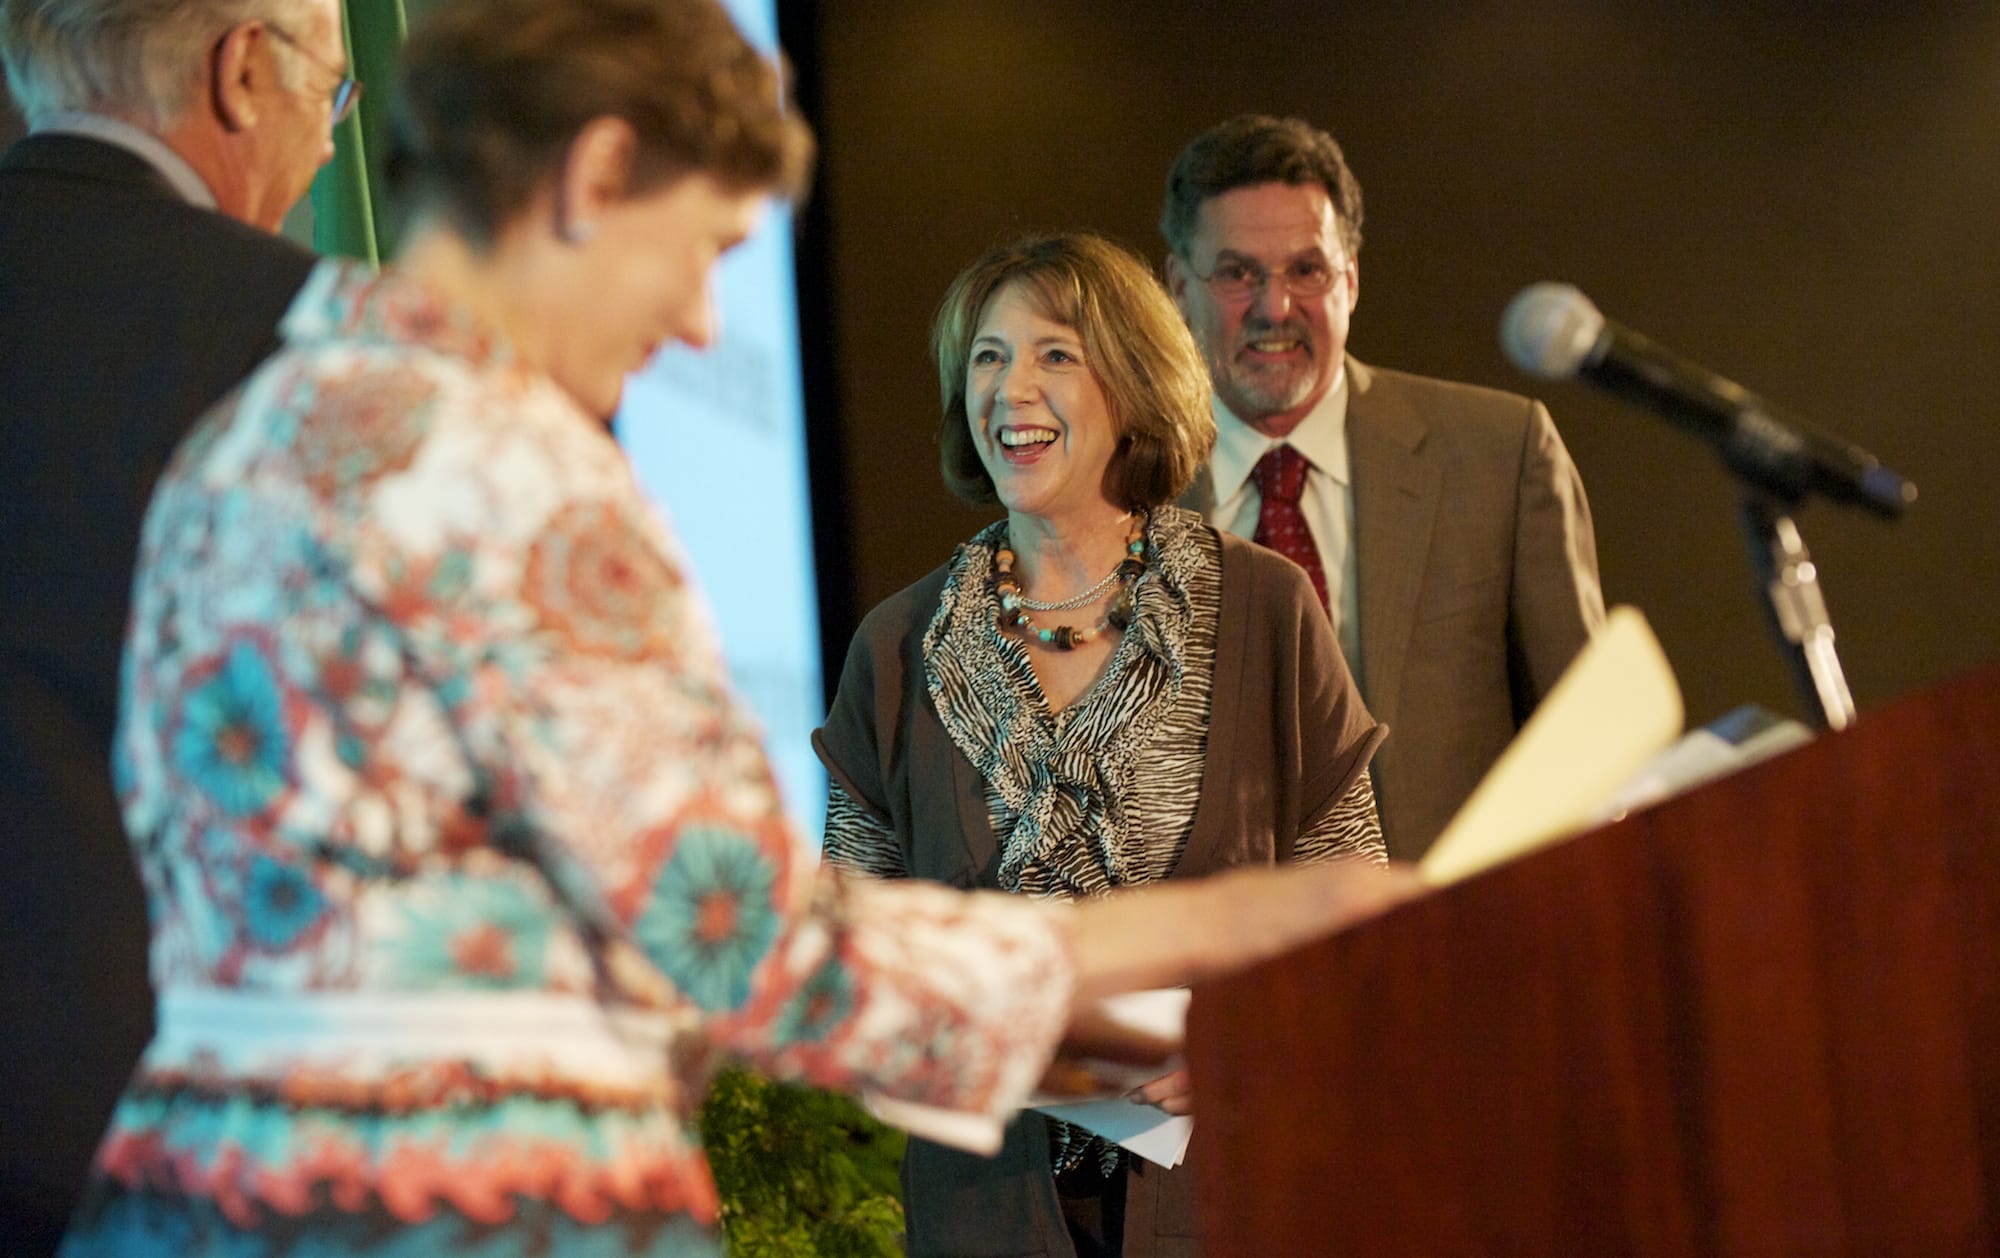 Jo Marie and Steve Hansen, right, are honored Tuesday as 2012 Philanthropists of the Year by last year's winners, Connie and Lee Kearney, left, at the Community Foundation for Southwest Washington's annual luncheon at the Hilton Vancouver Washington.